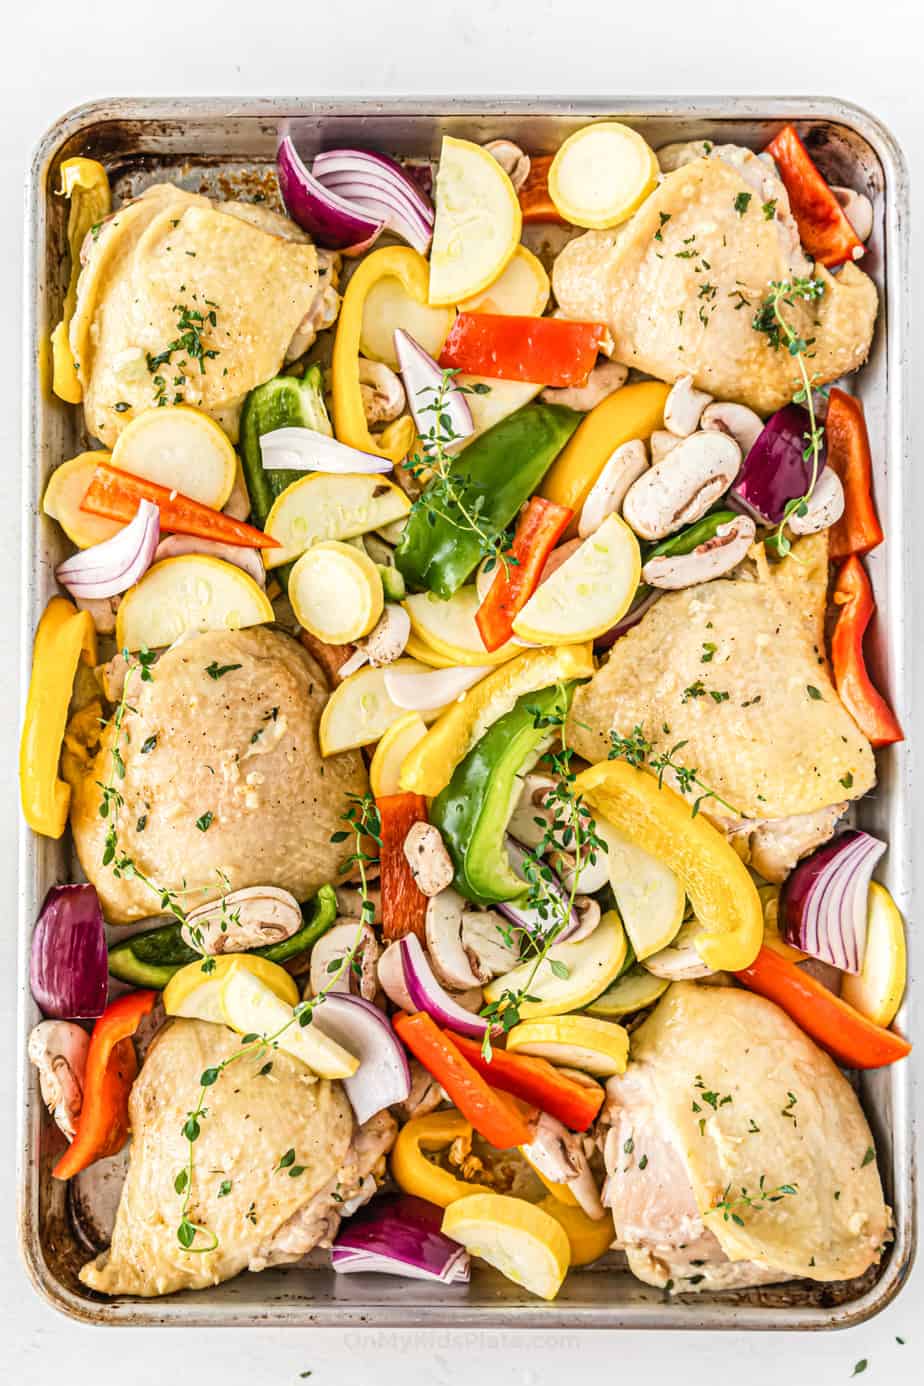 Half cooked chicken thighs on pan with squash, peppers and other vegetables  around them